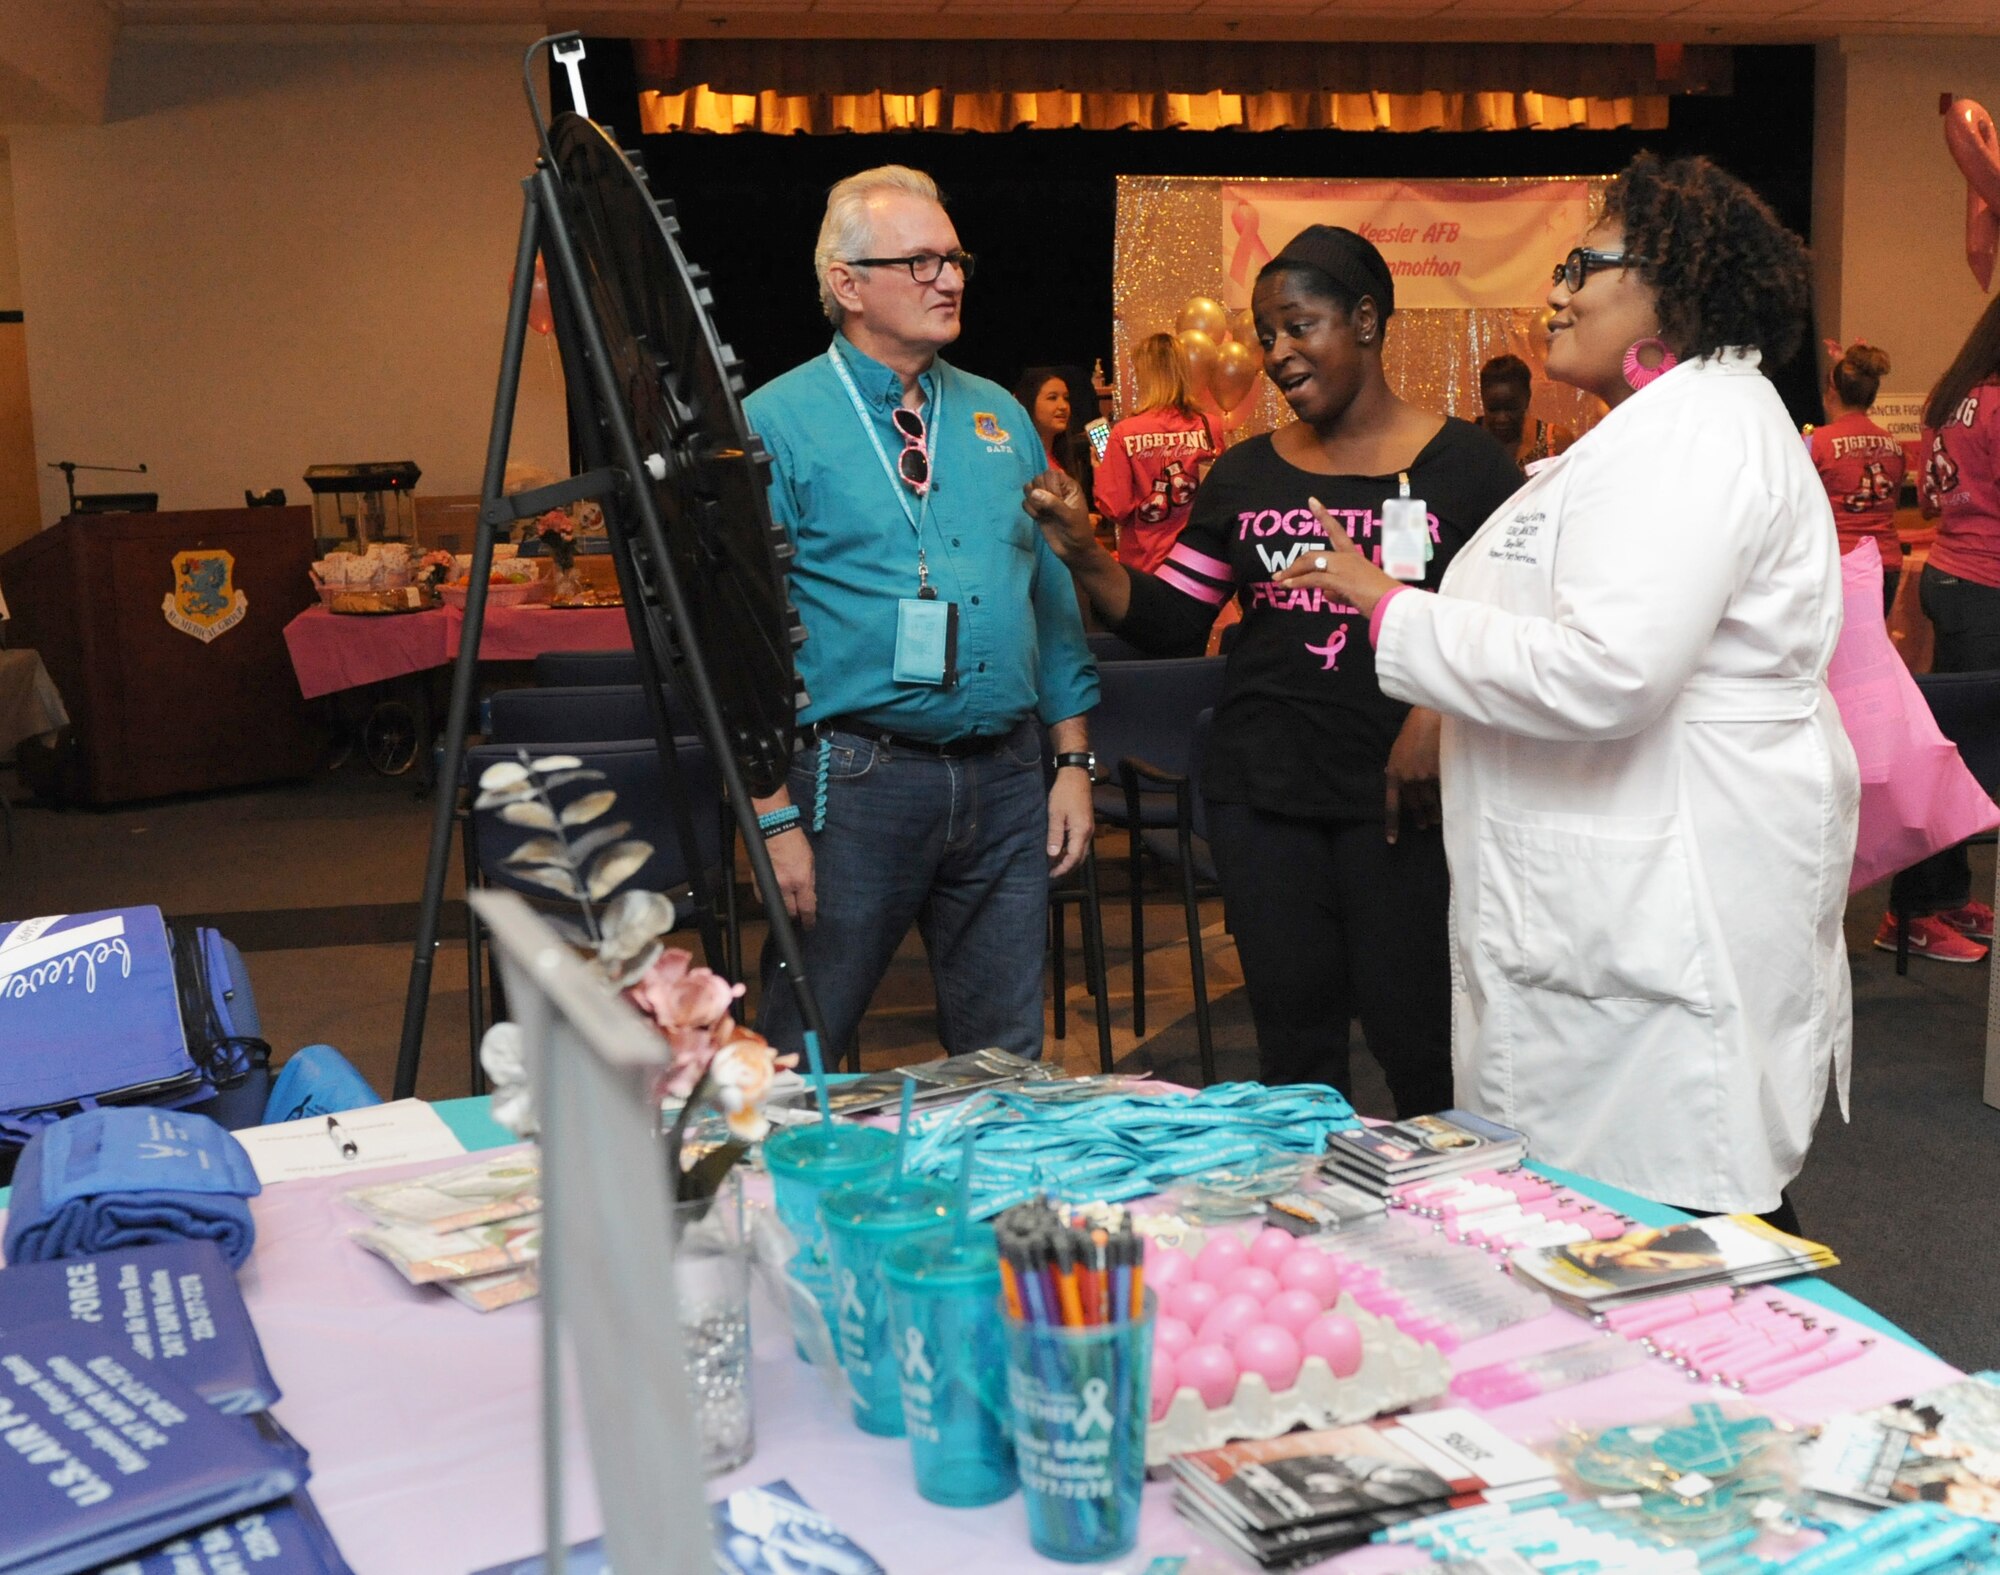 Barry Newman, 81st Training Wing Sexual Assault Prevention and Response Program specialist, provides SAPR information to Maj. Melinda Williamson, 81st Medical Operations Squadron registered nurse, and Yolanda Moulds-Love, 81st Diagnostic and Therapeutics Squadron clinical pharmacist, during the 5th Annual Mammothon Cancer Screening and Preventative Health Fair at the Don Wylie Auditorium Oct. 28, 2016, on Keesler Air Force Base, Miss. The walk-in event included screenings for multiple types of cancer and chronic diseases in honor of Breast Cancer Awareness Month. Flu shots were also provided upon request. (U.S. Air Force photo by Kemberly Groue/Released)